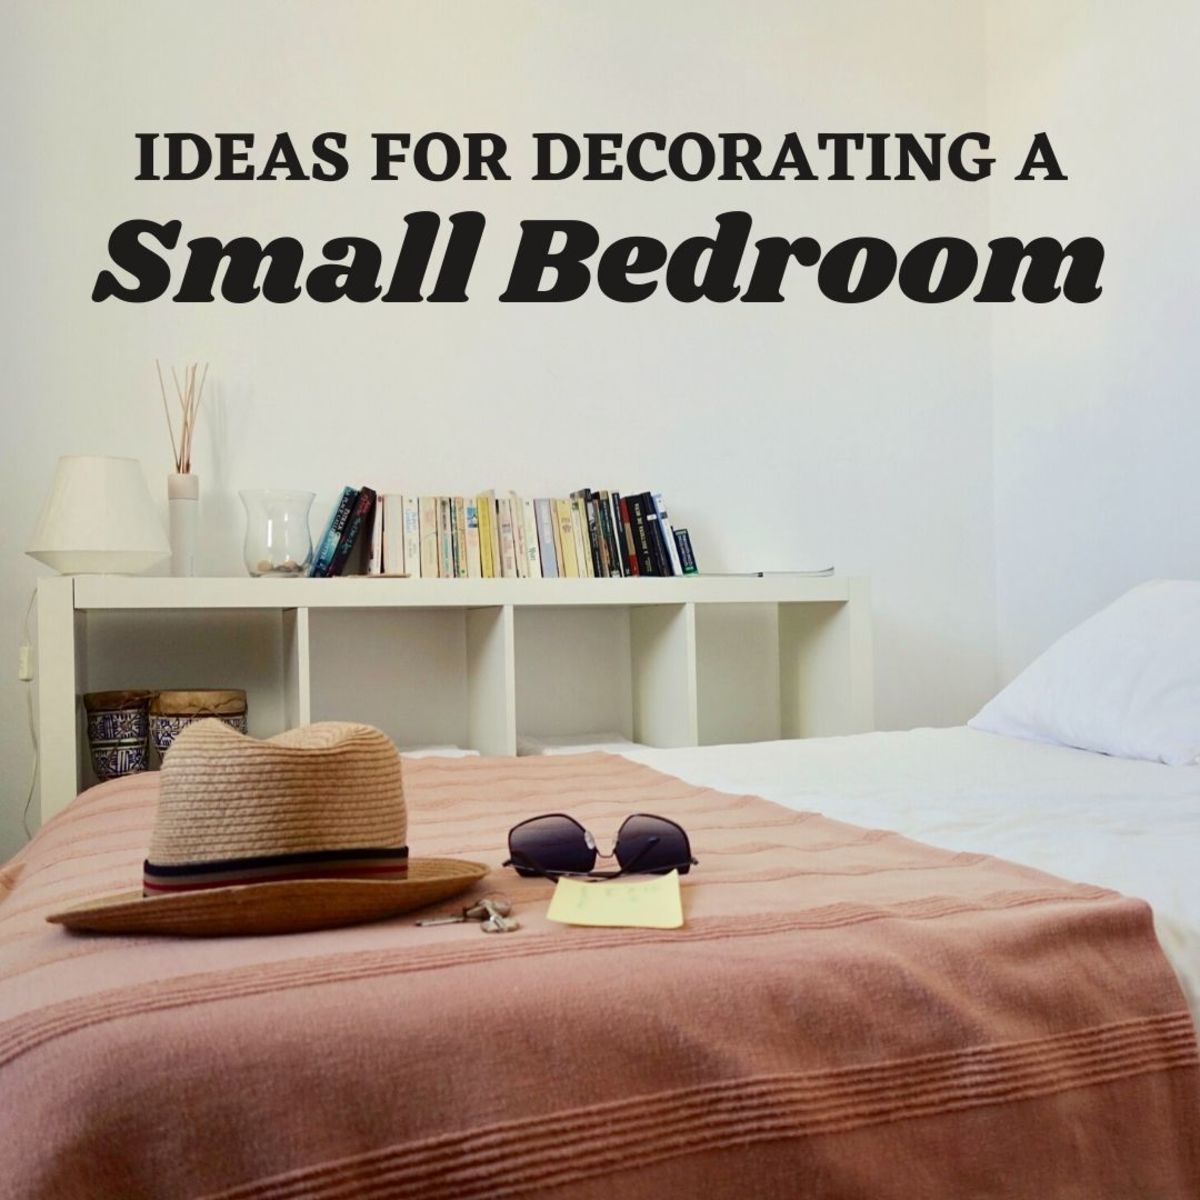 Decorating your small bedroom can be a challenge—here are some tips and tricks that will make it easier!